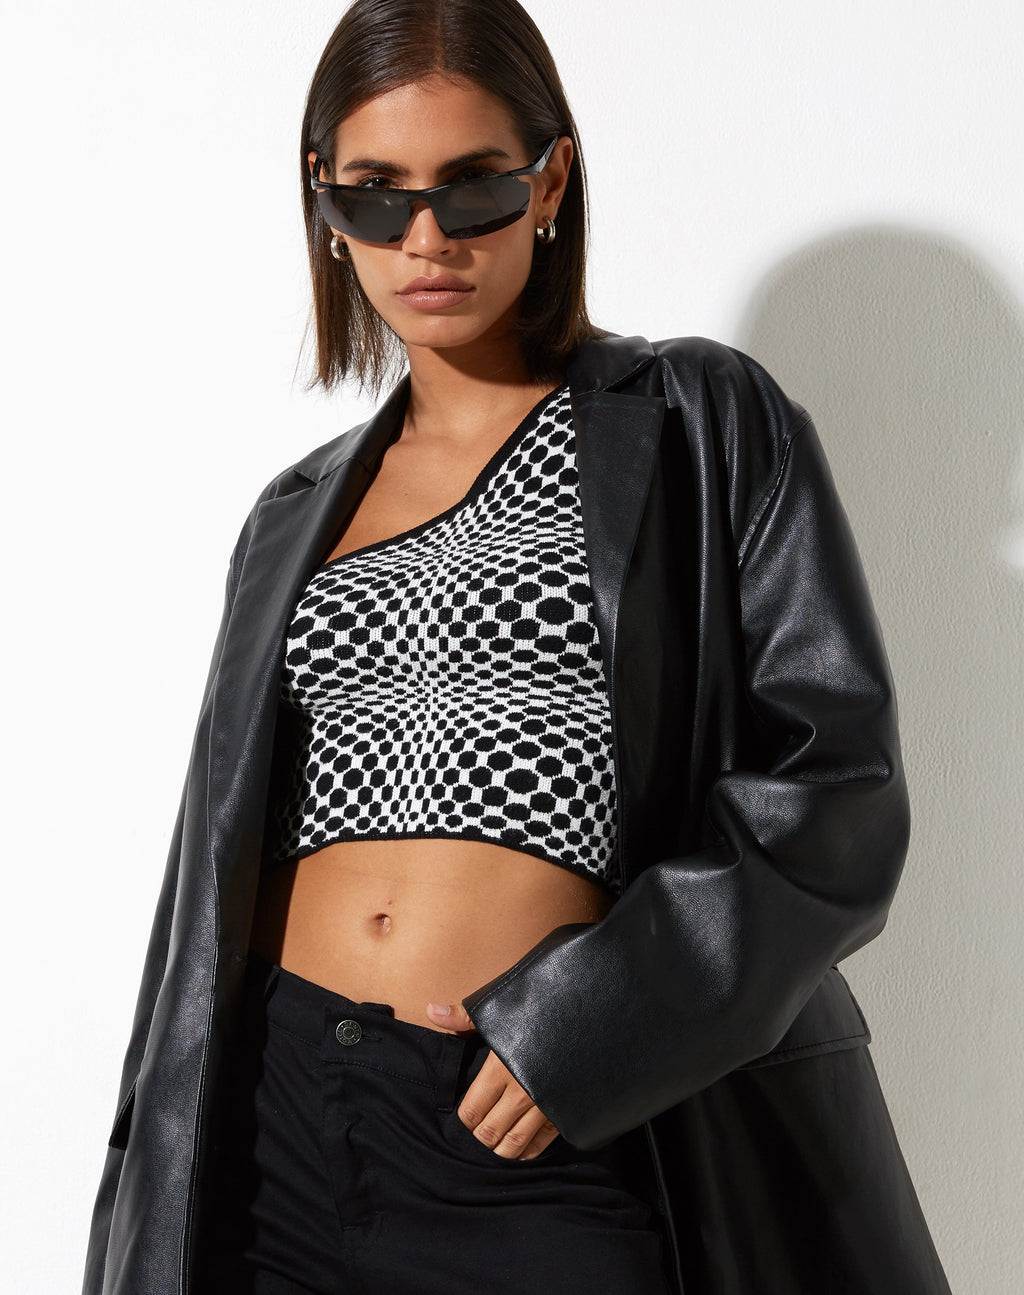 Pipon Crop Top in Optic Monochrome Square Black and White